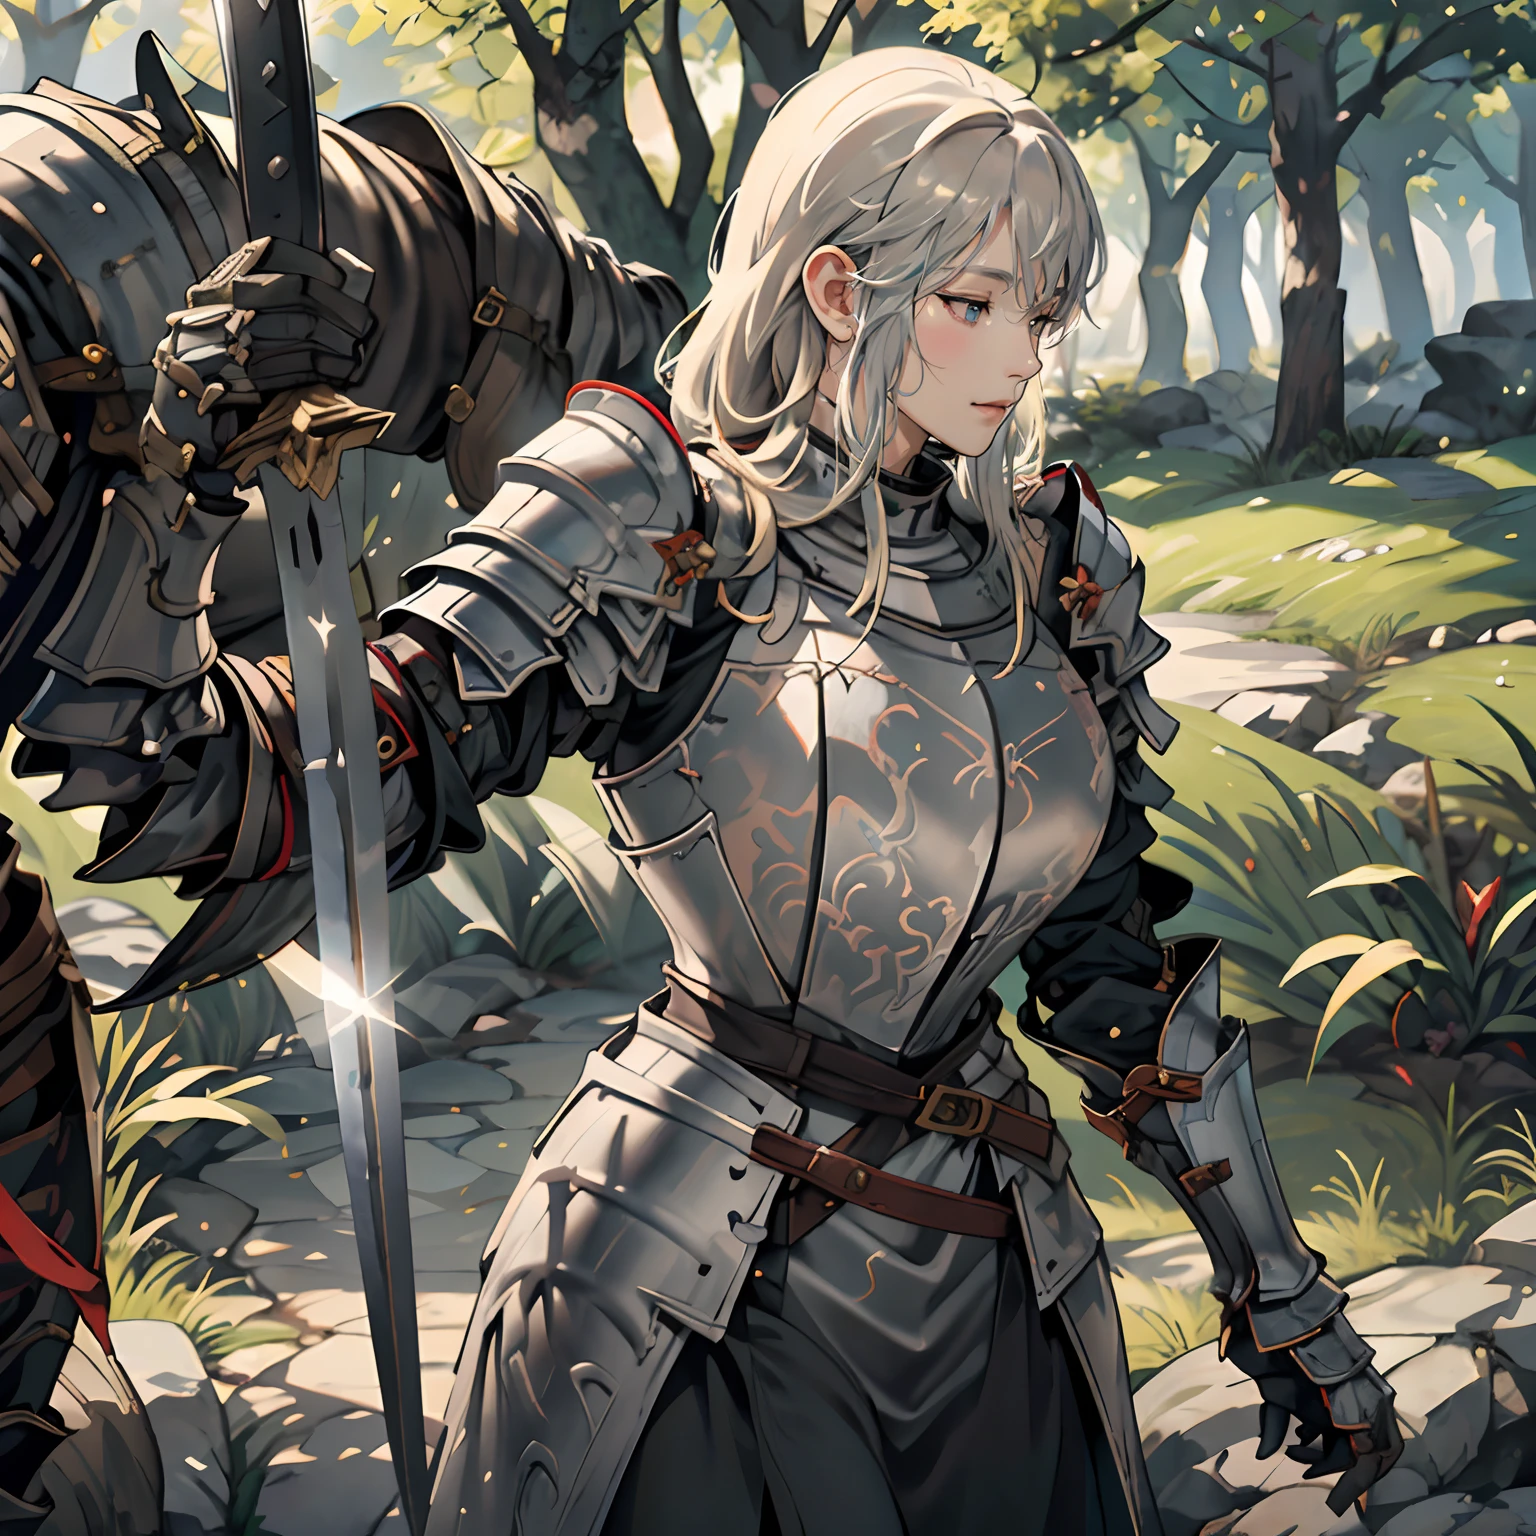 Women in Their 20s、1 persons、a close up of a woman in armor holding a sword, armor girl, Female knight, large full breasts、full armor, full armor, Gorgeous Female Paladin, Female knight, of a beautiful female knight, Beautiful armor, Plump、full armor, Armor exposure, Gorgeous full-body armor, stunning armor, Trending on ArtStation pixiv, beautiful female knight、in woods、lake、holding a greatsword、Great Sword of Steel、Staring at me